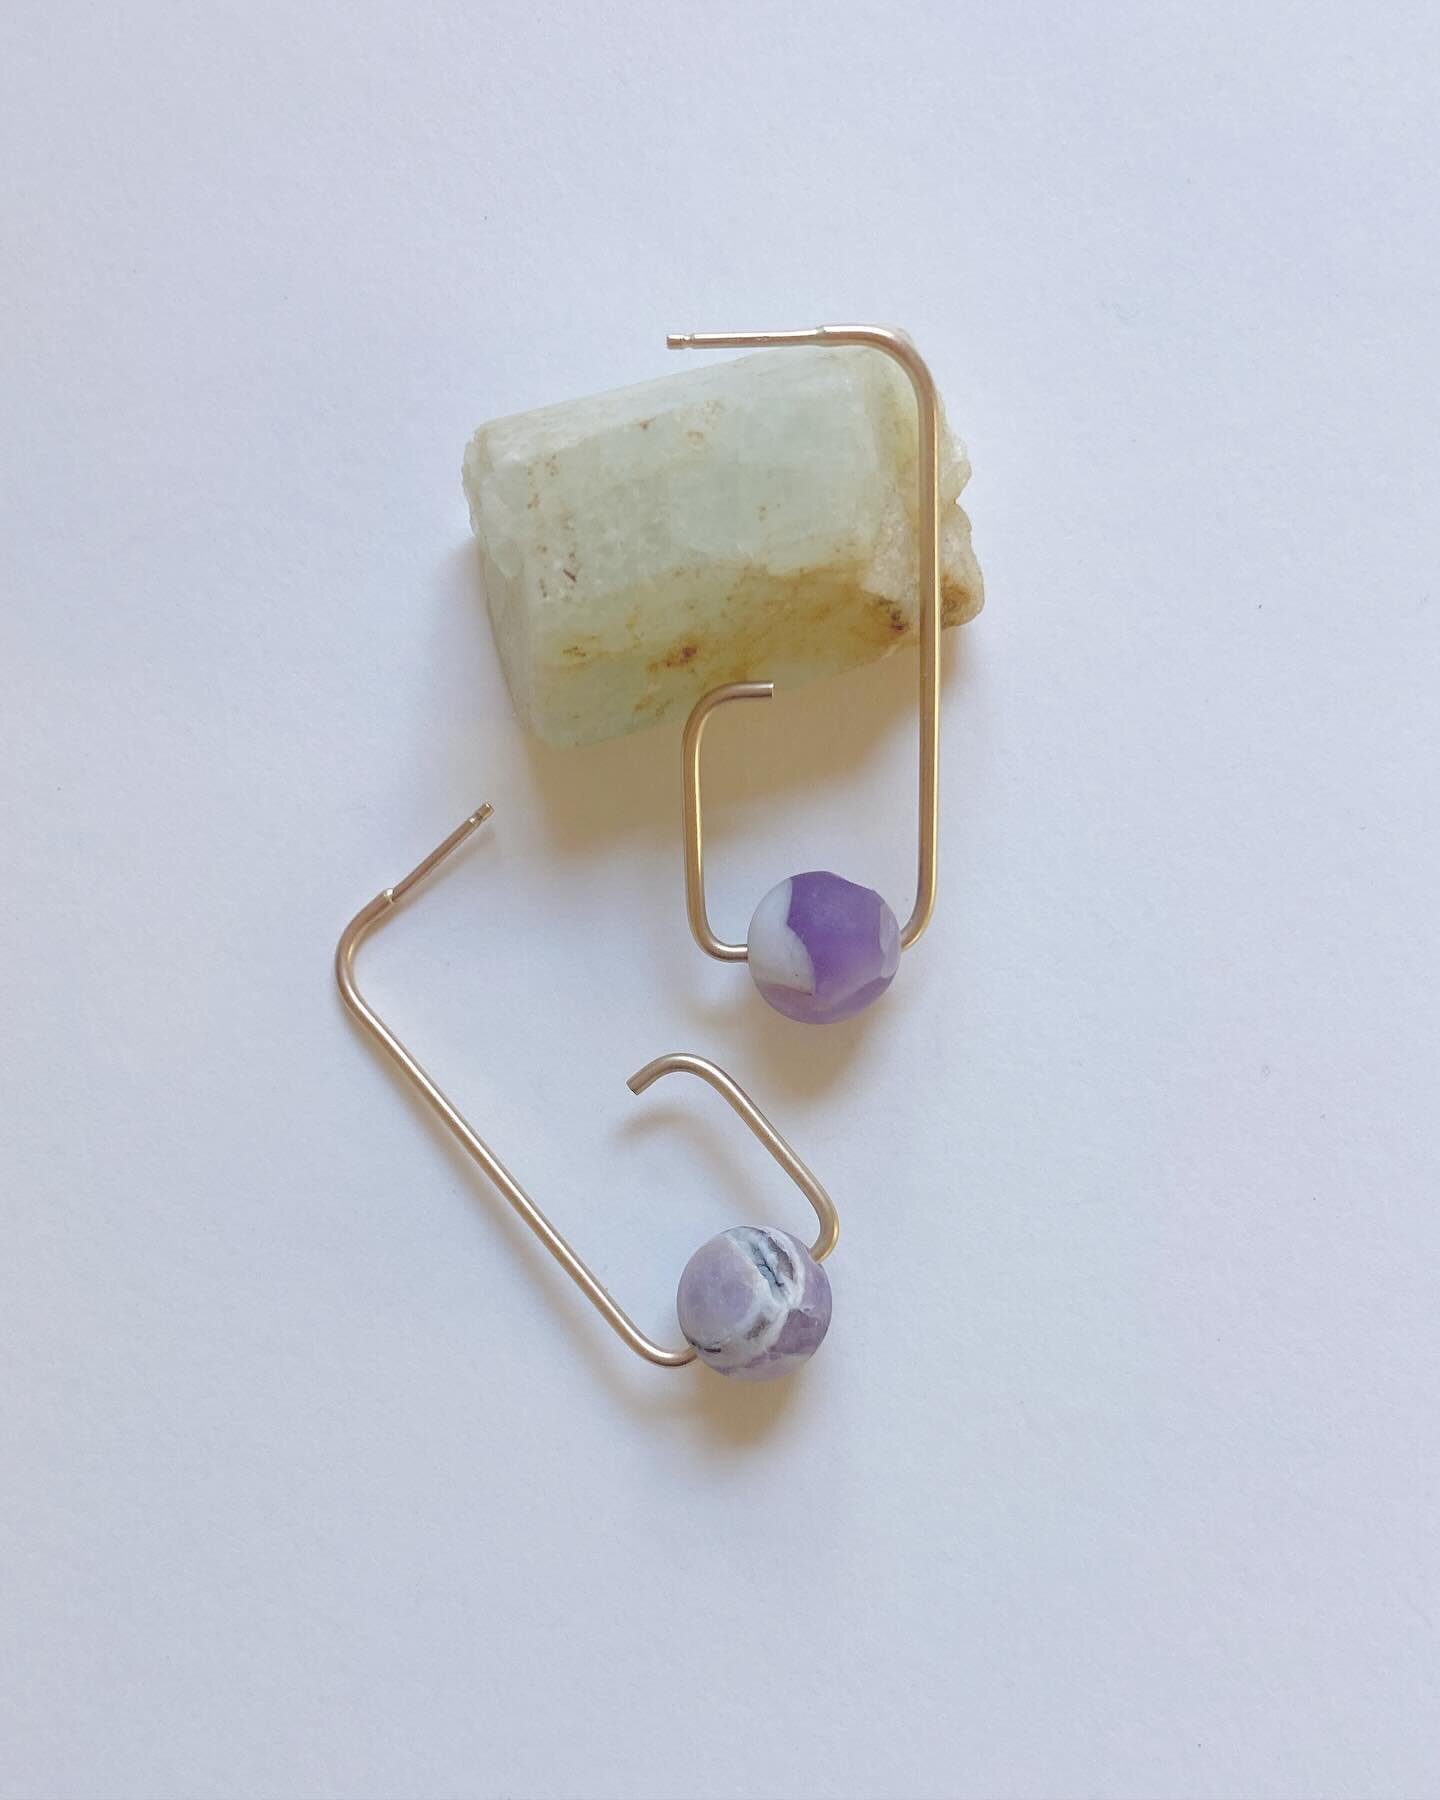 New in the shop! The Furl earring, featuring matte chevron amethyst beads on hand-formed abstract spirals in 14k gold-fill. 

#handmadejewelry #shopsmall #828 #avlartist #gemstonejewelry #goldjewerly #abstractjewelry #mattegemstone #hoopearrings #pur